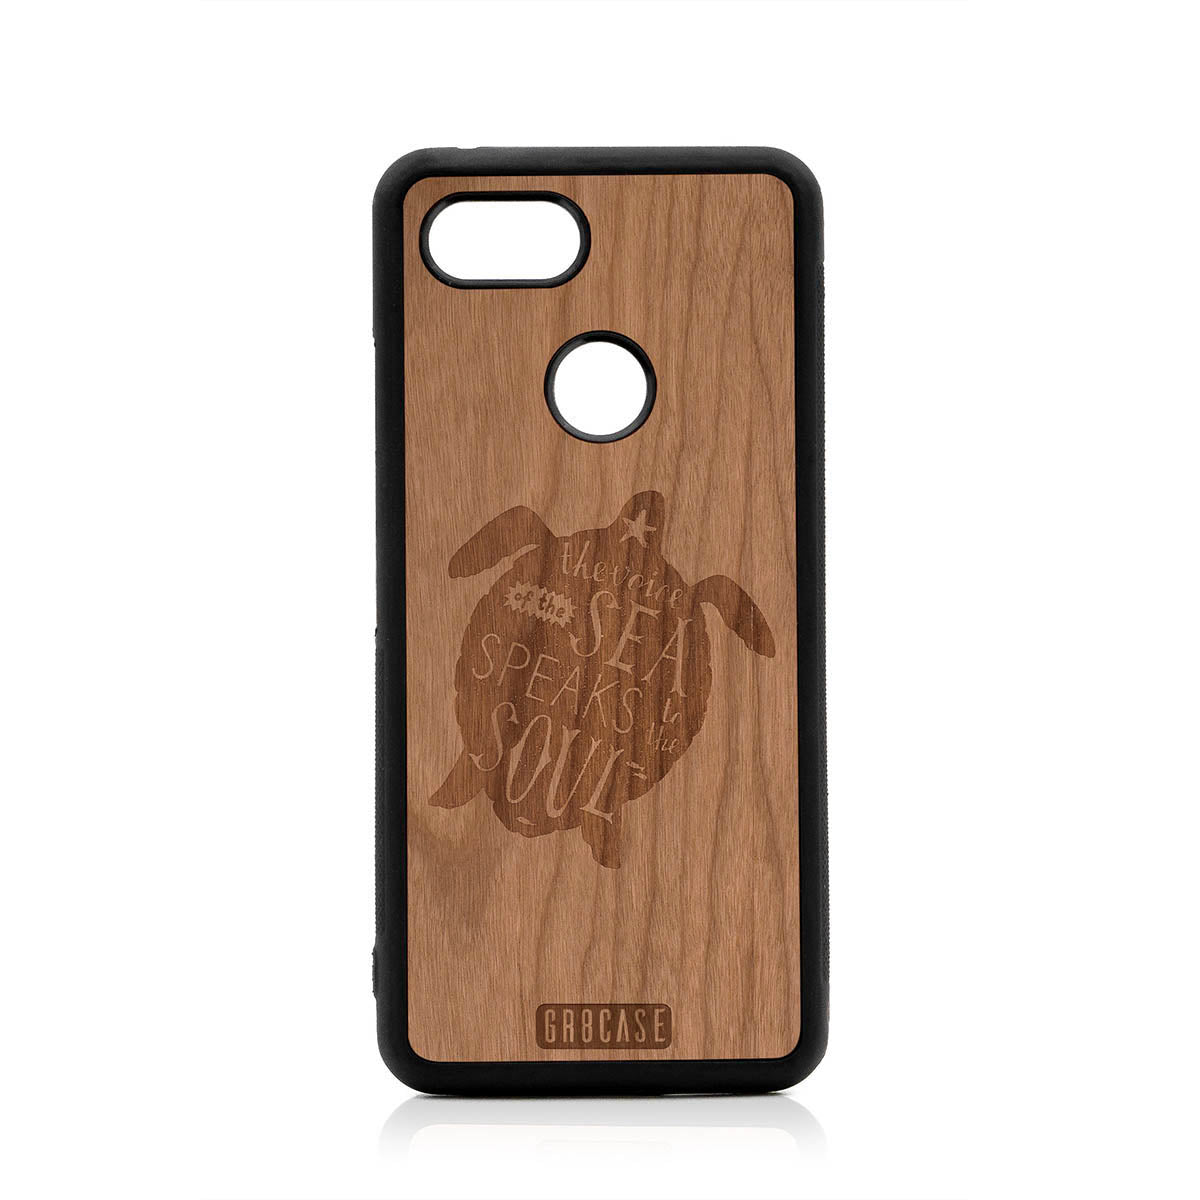 The Voice Of The Sea Speaks To The Soul (Turtle) Design Wood Case For Google Pixel 3